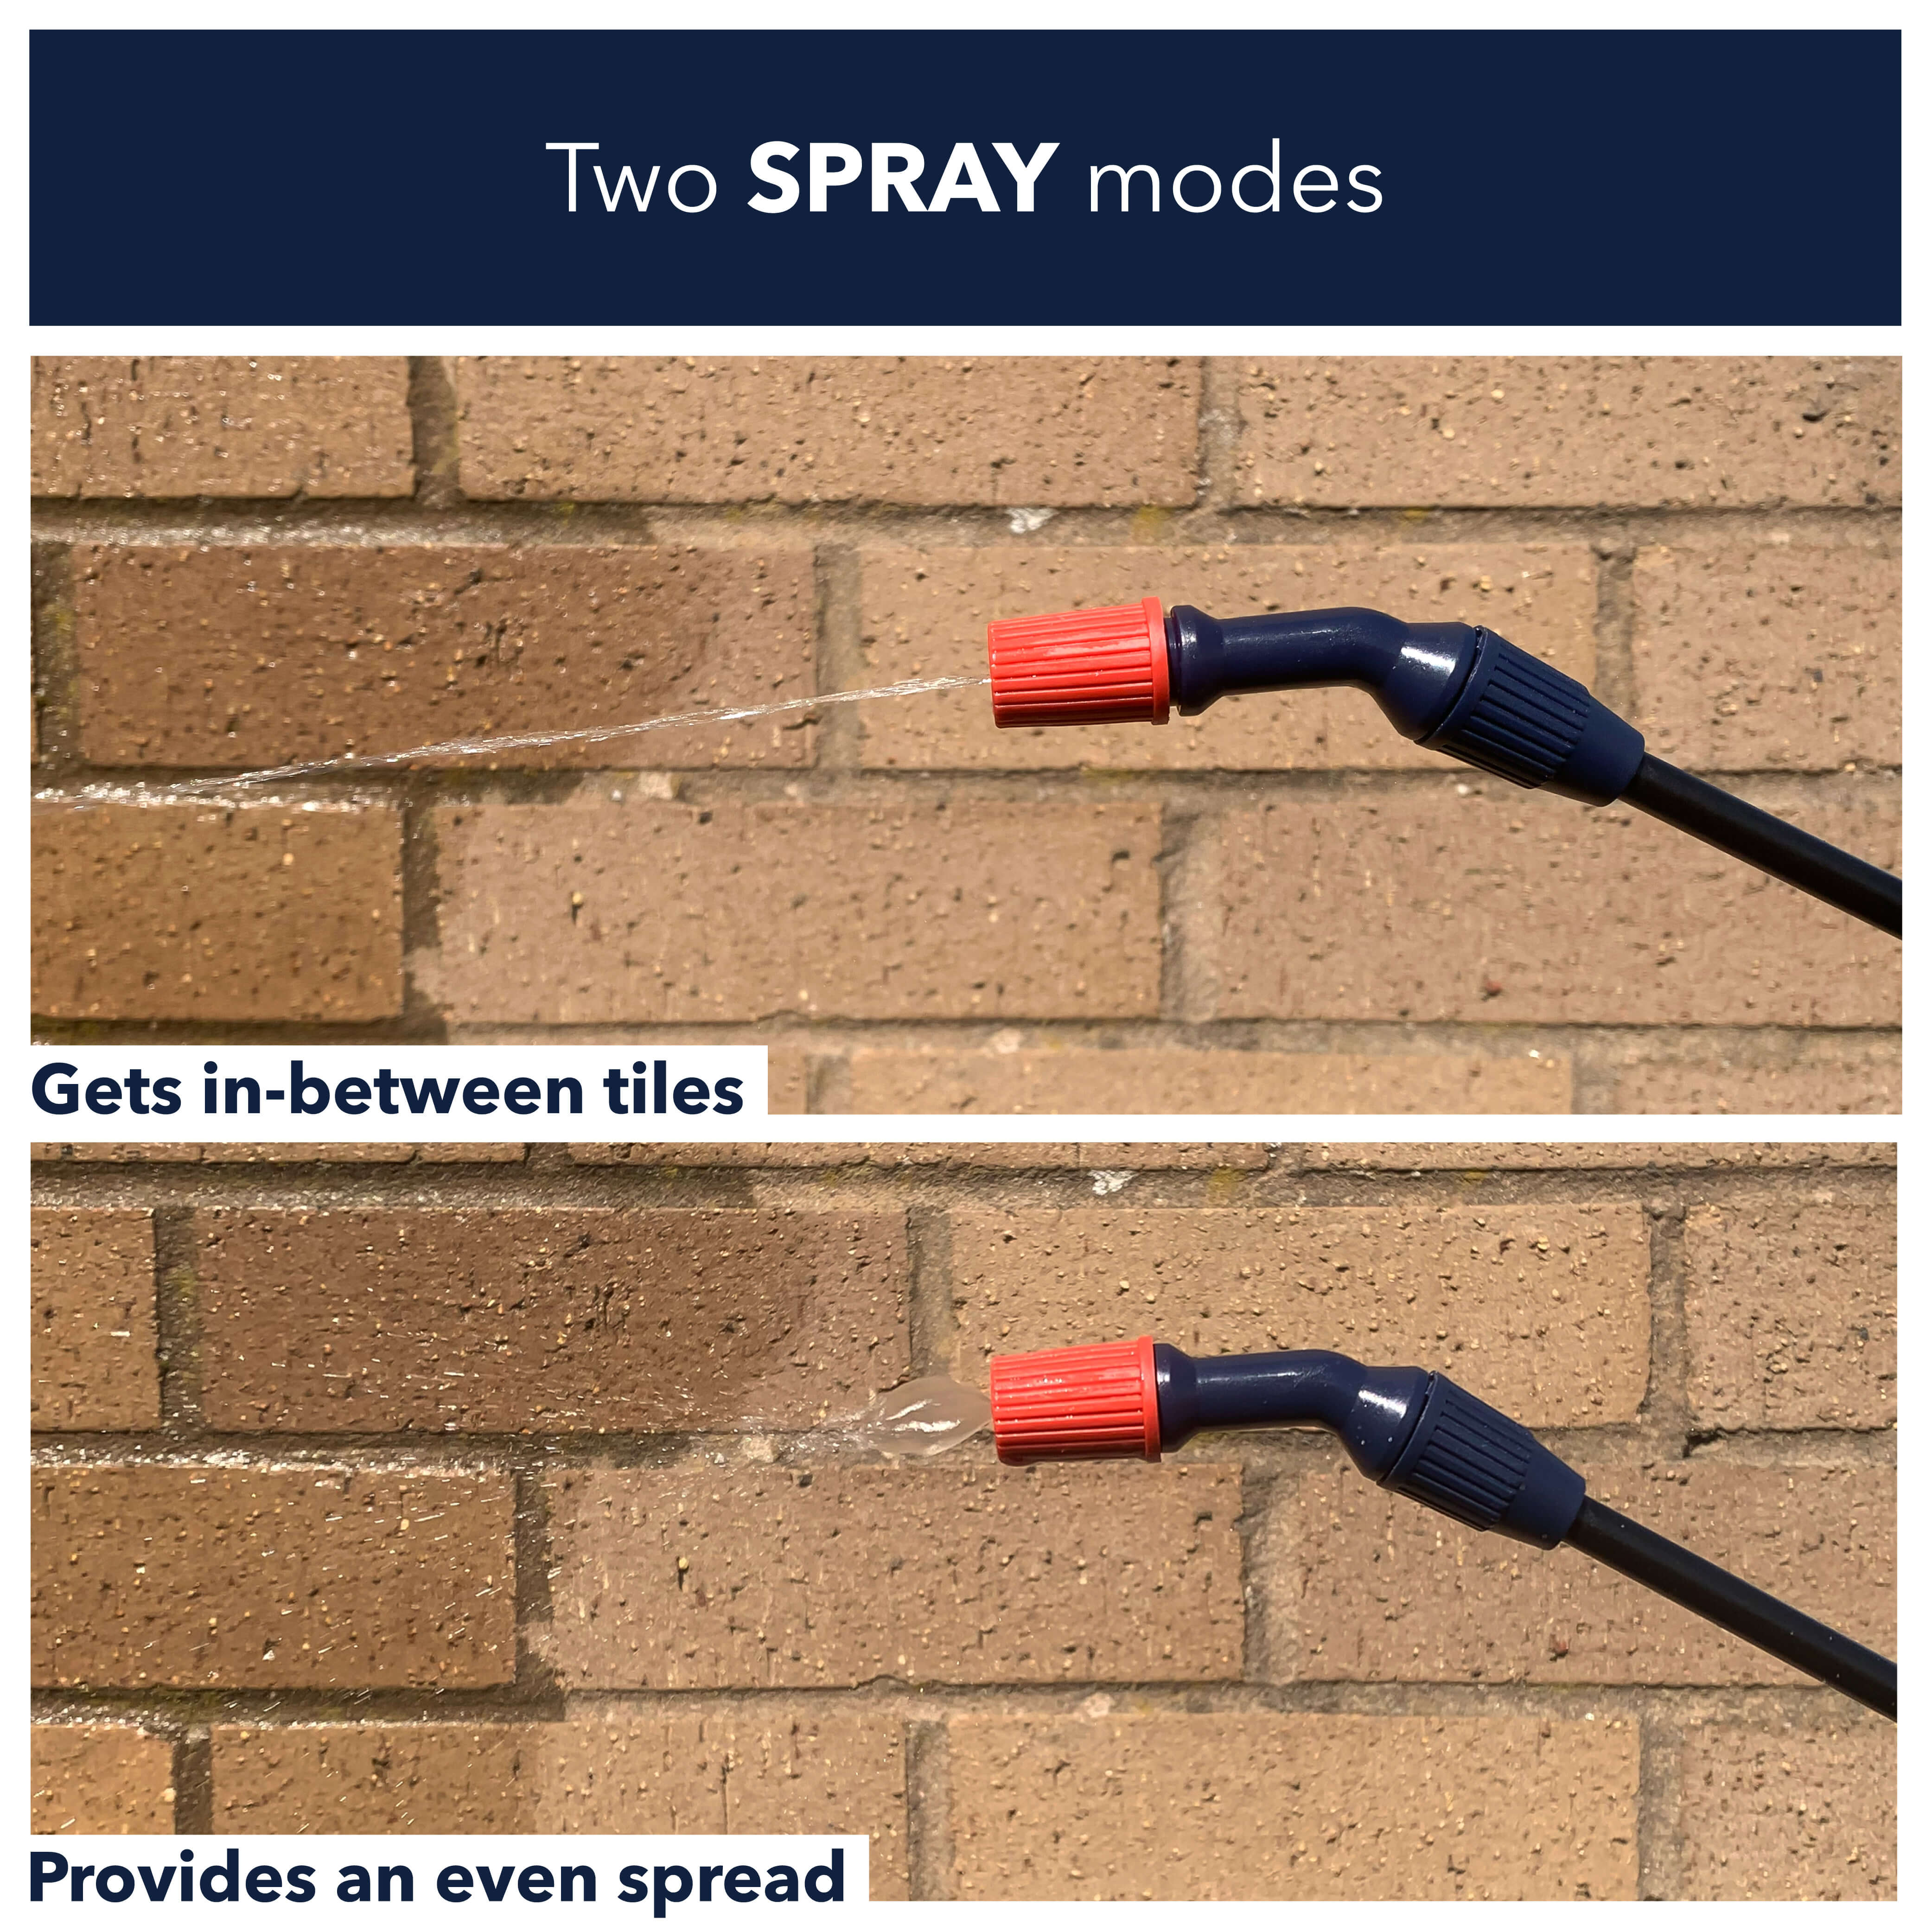 Two spray modes, one gets in-between tiles, the other provides an even spread